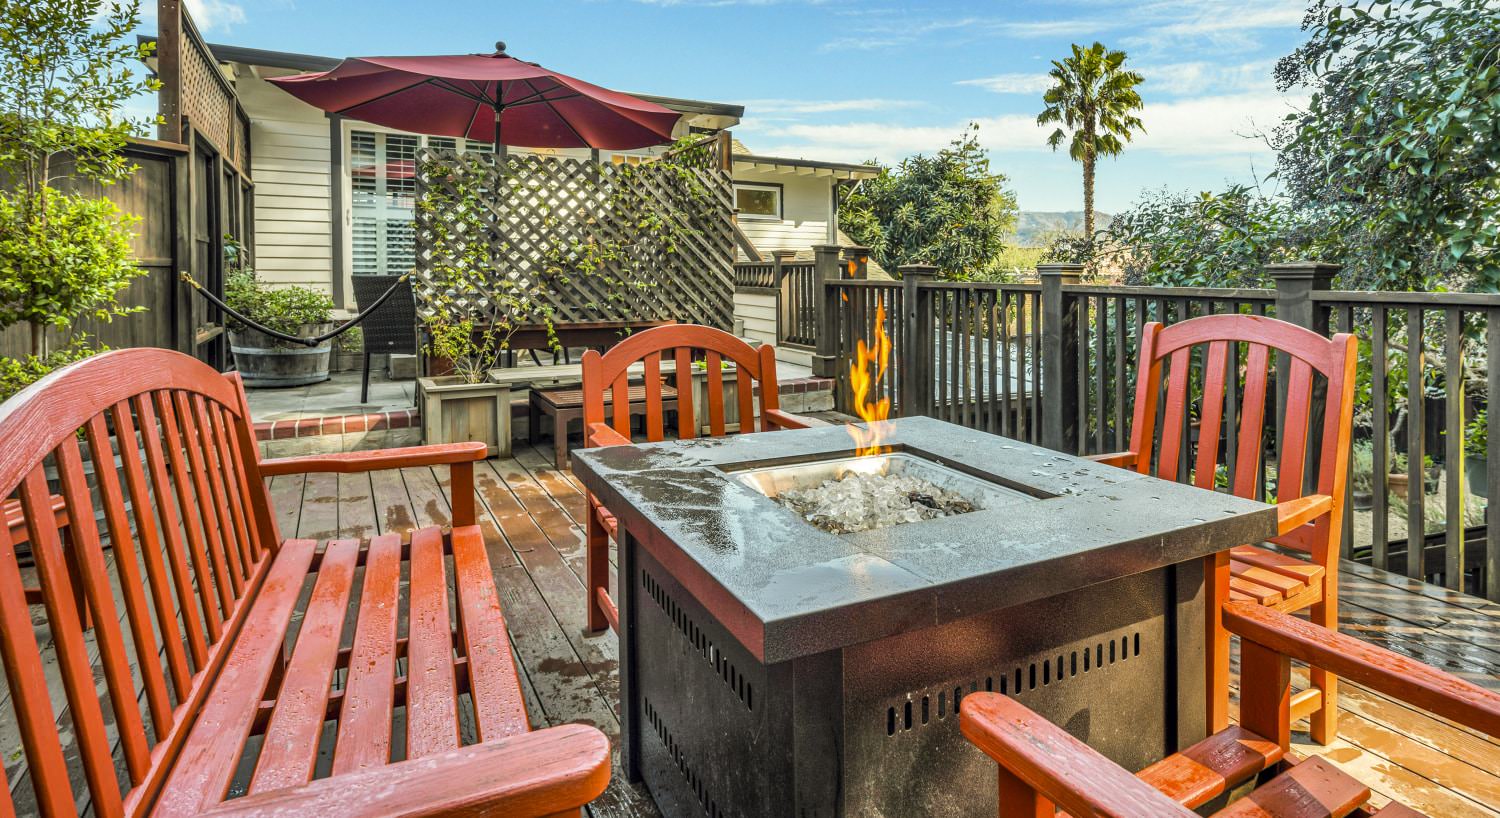 Orange wooden patio chairs and bench surrounding tabletop firepit on wooden deck